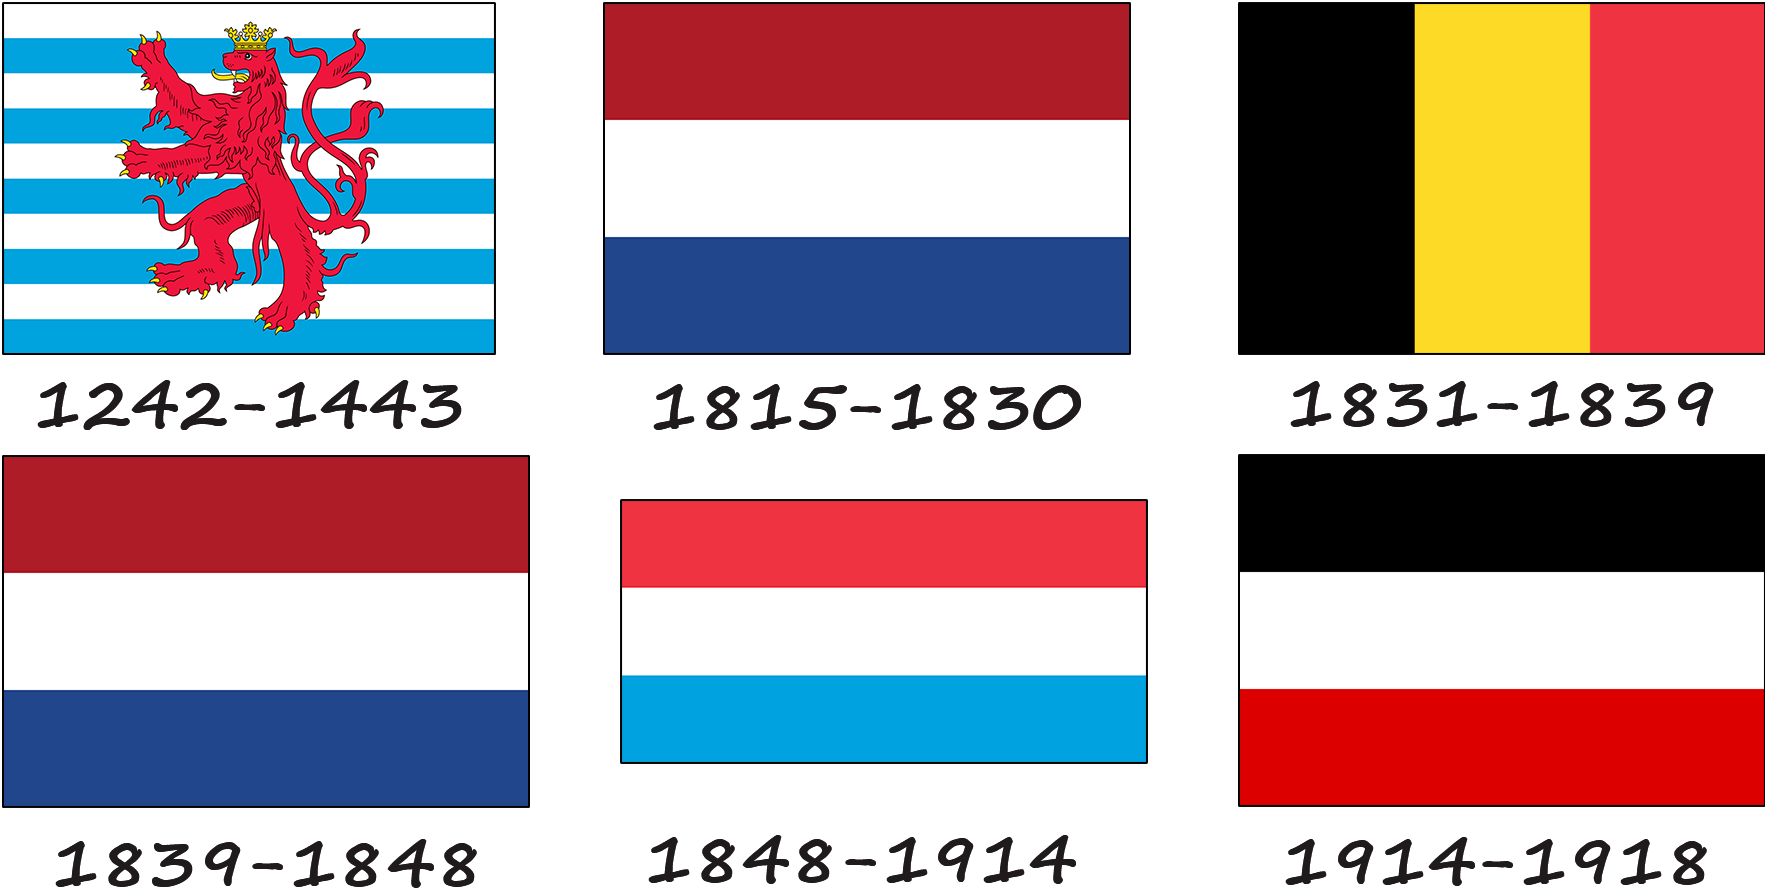 History of the Luxembourg flag